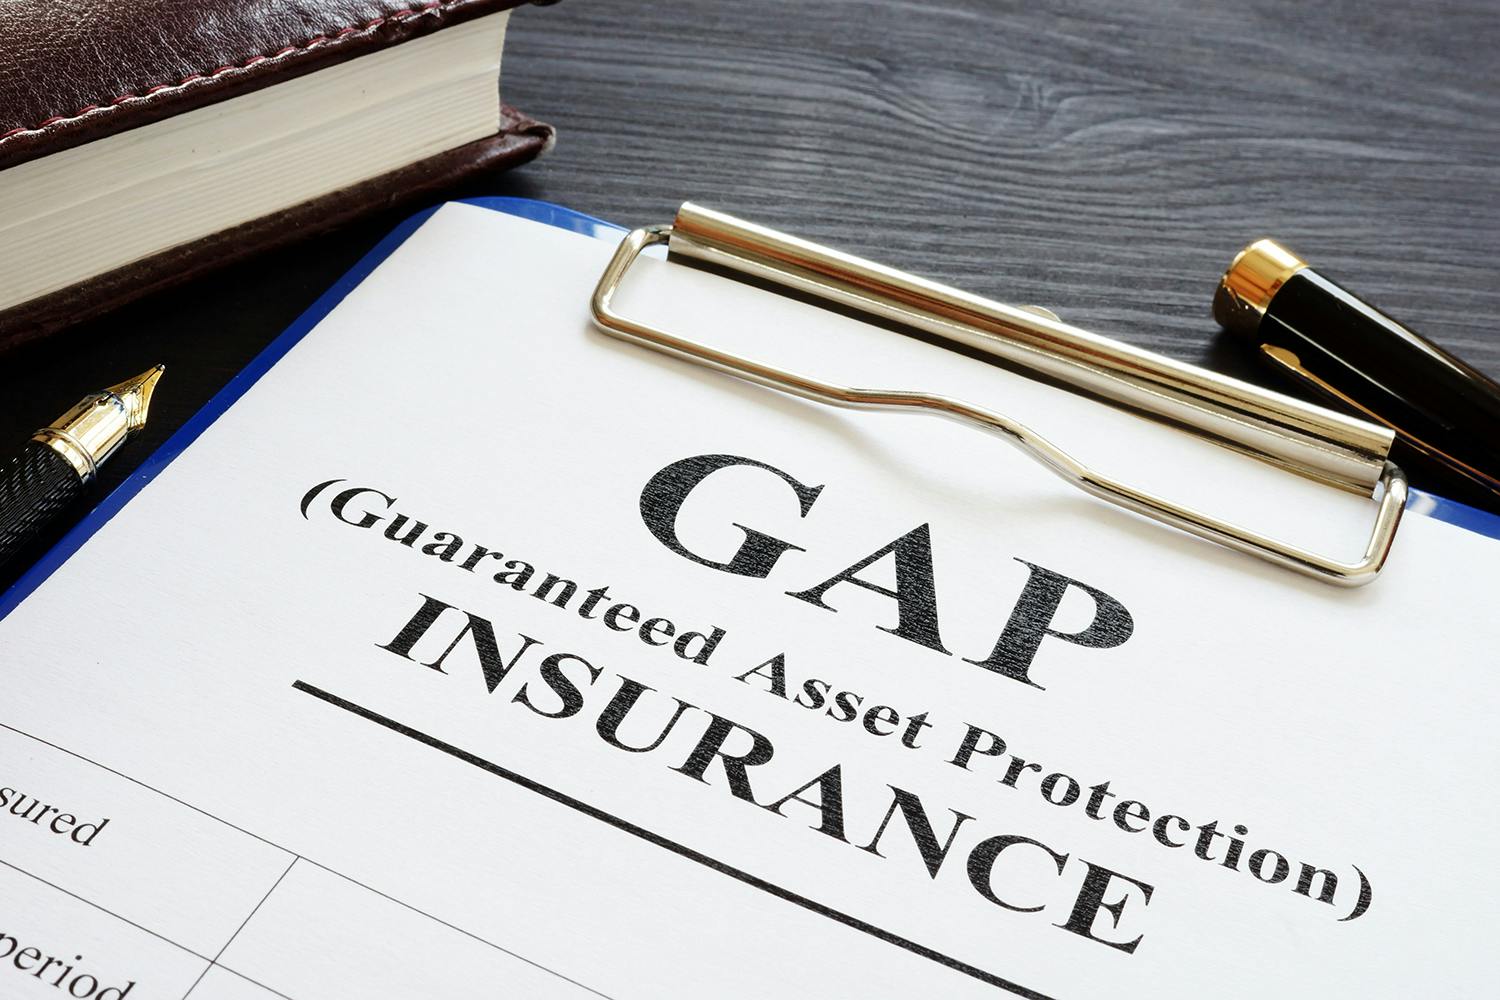 GAP (Guaranteed Asset Protection) insurance on clipboard with pens